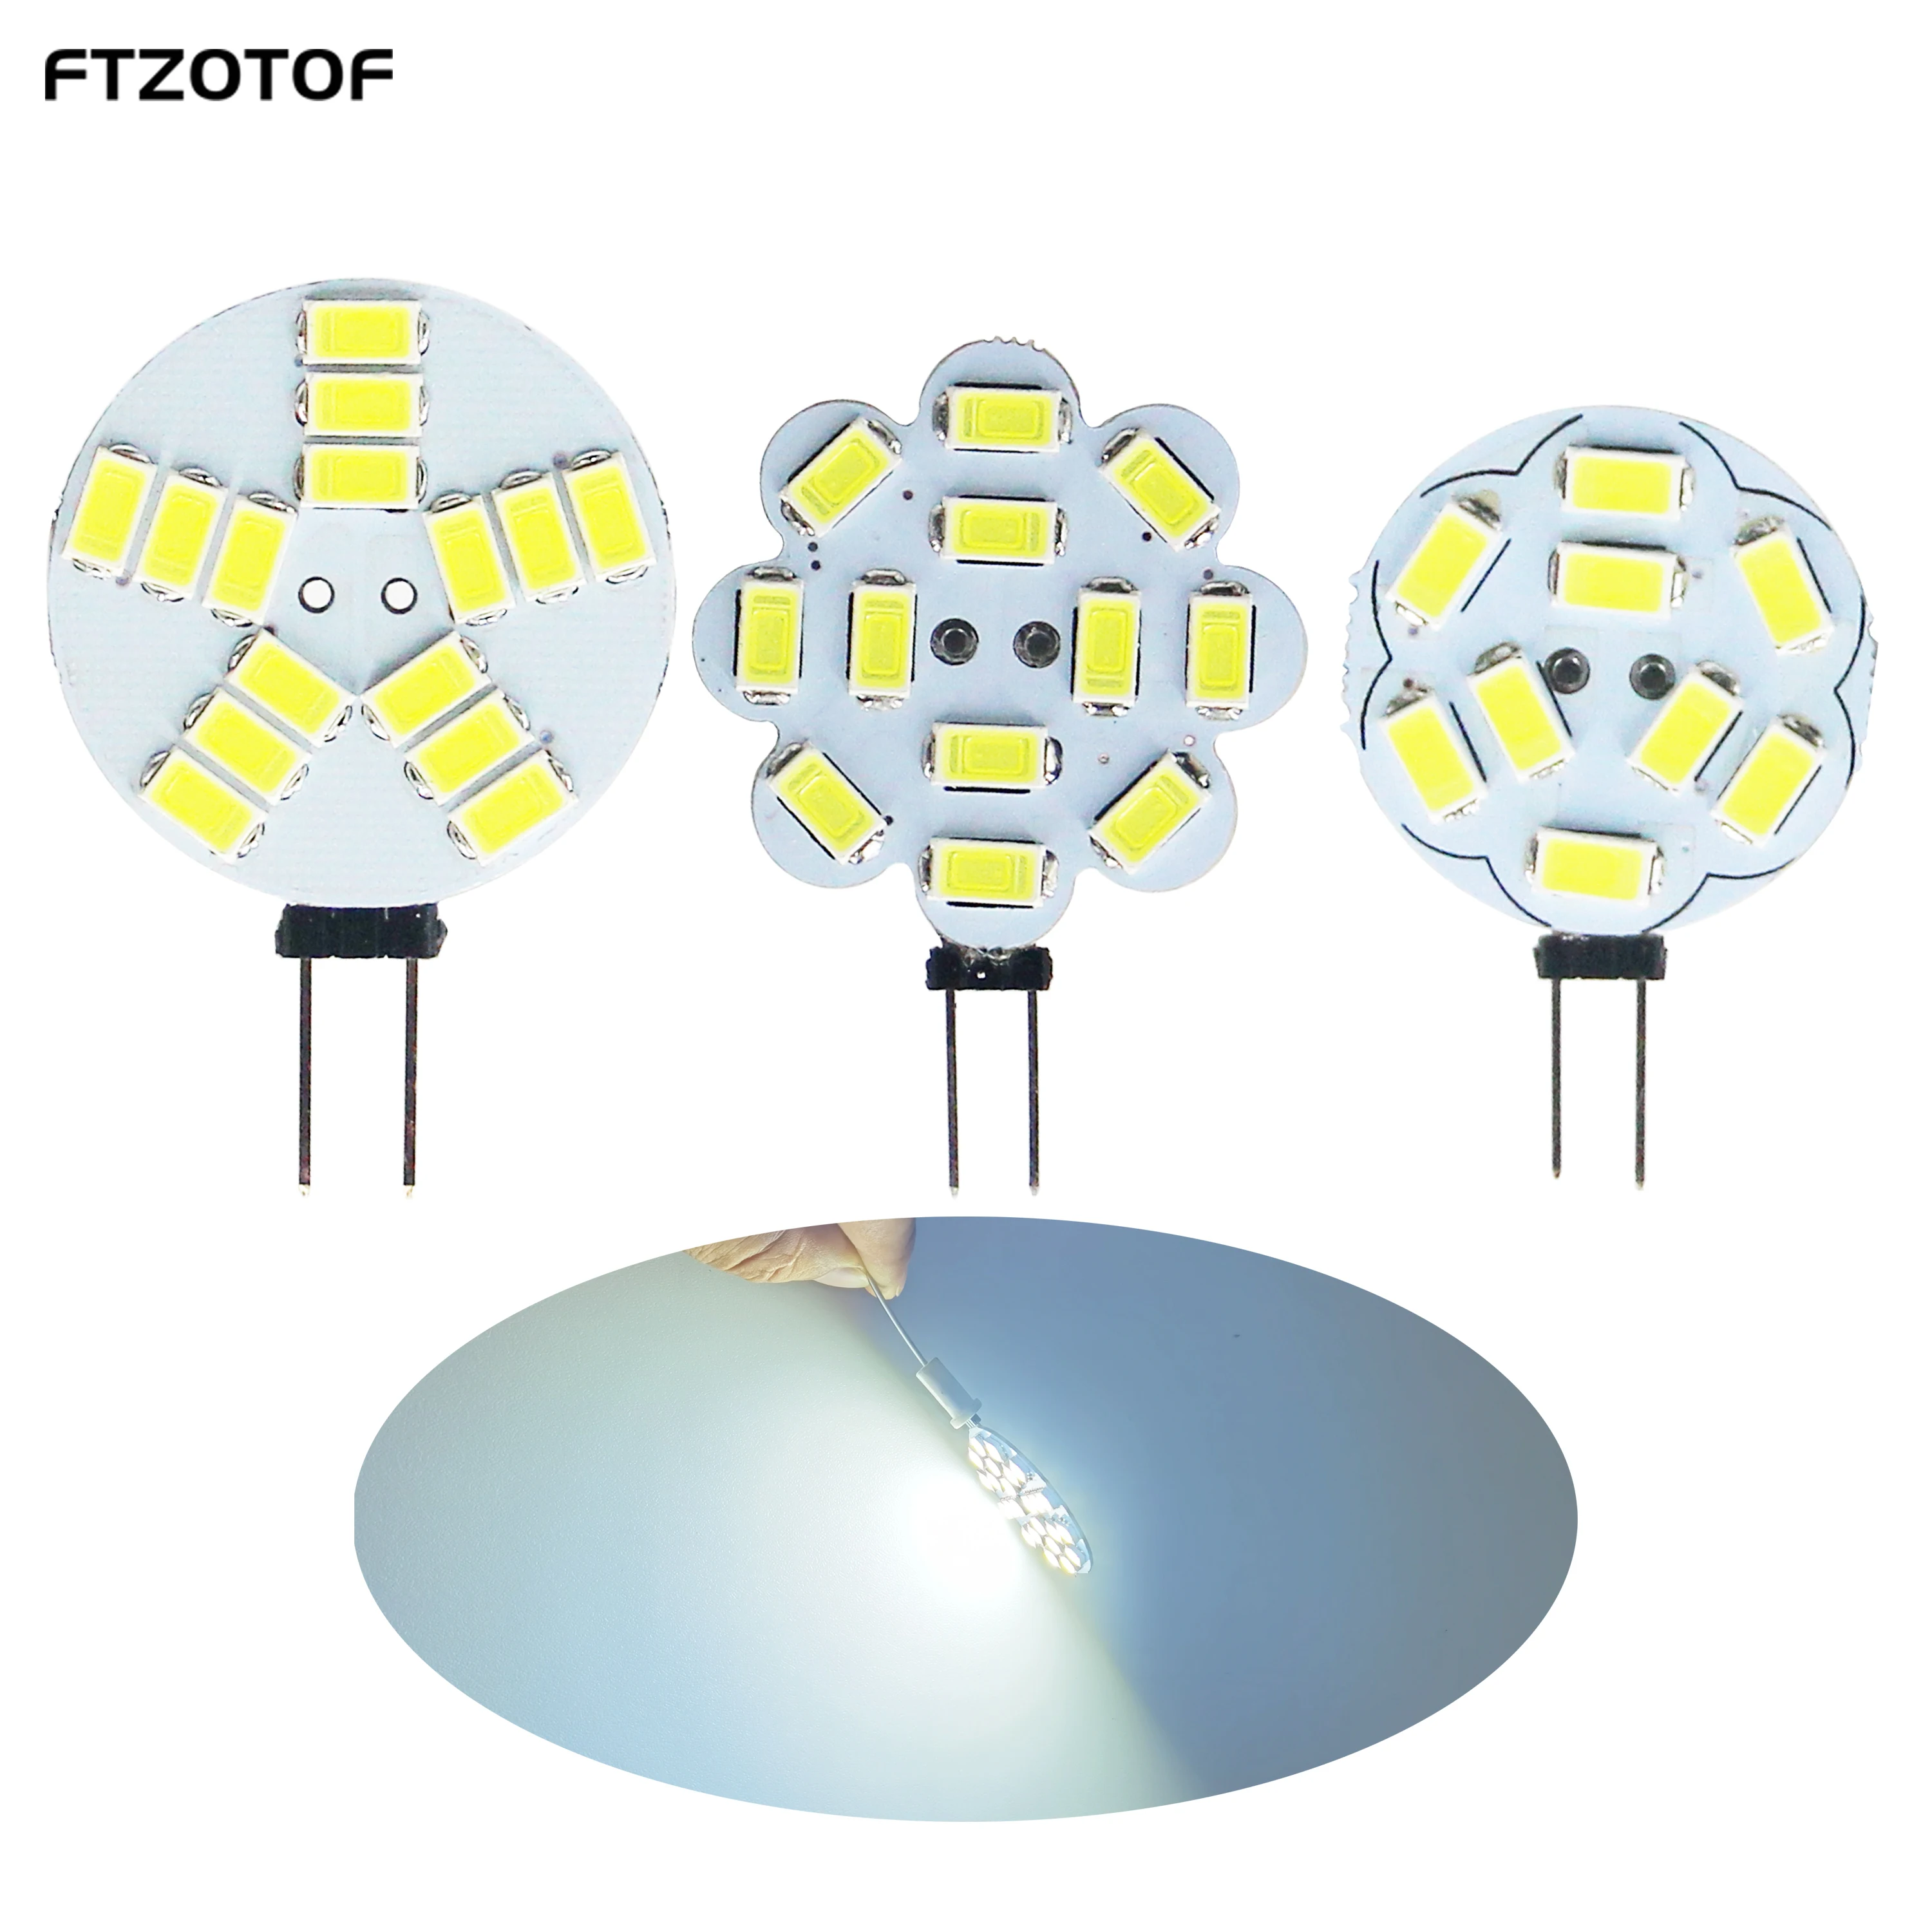 

FTZOTOF LED COB Chip 12V On DC G4 5730 SMD Replacement Halogen 120 Bulb 1.8W 2.4W 3W Warm Cool White For Home Lamp Lighti Source